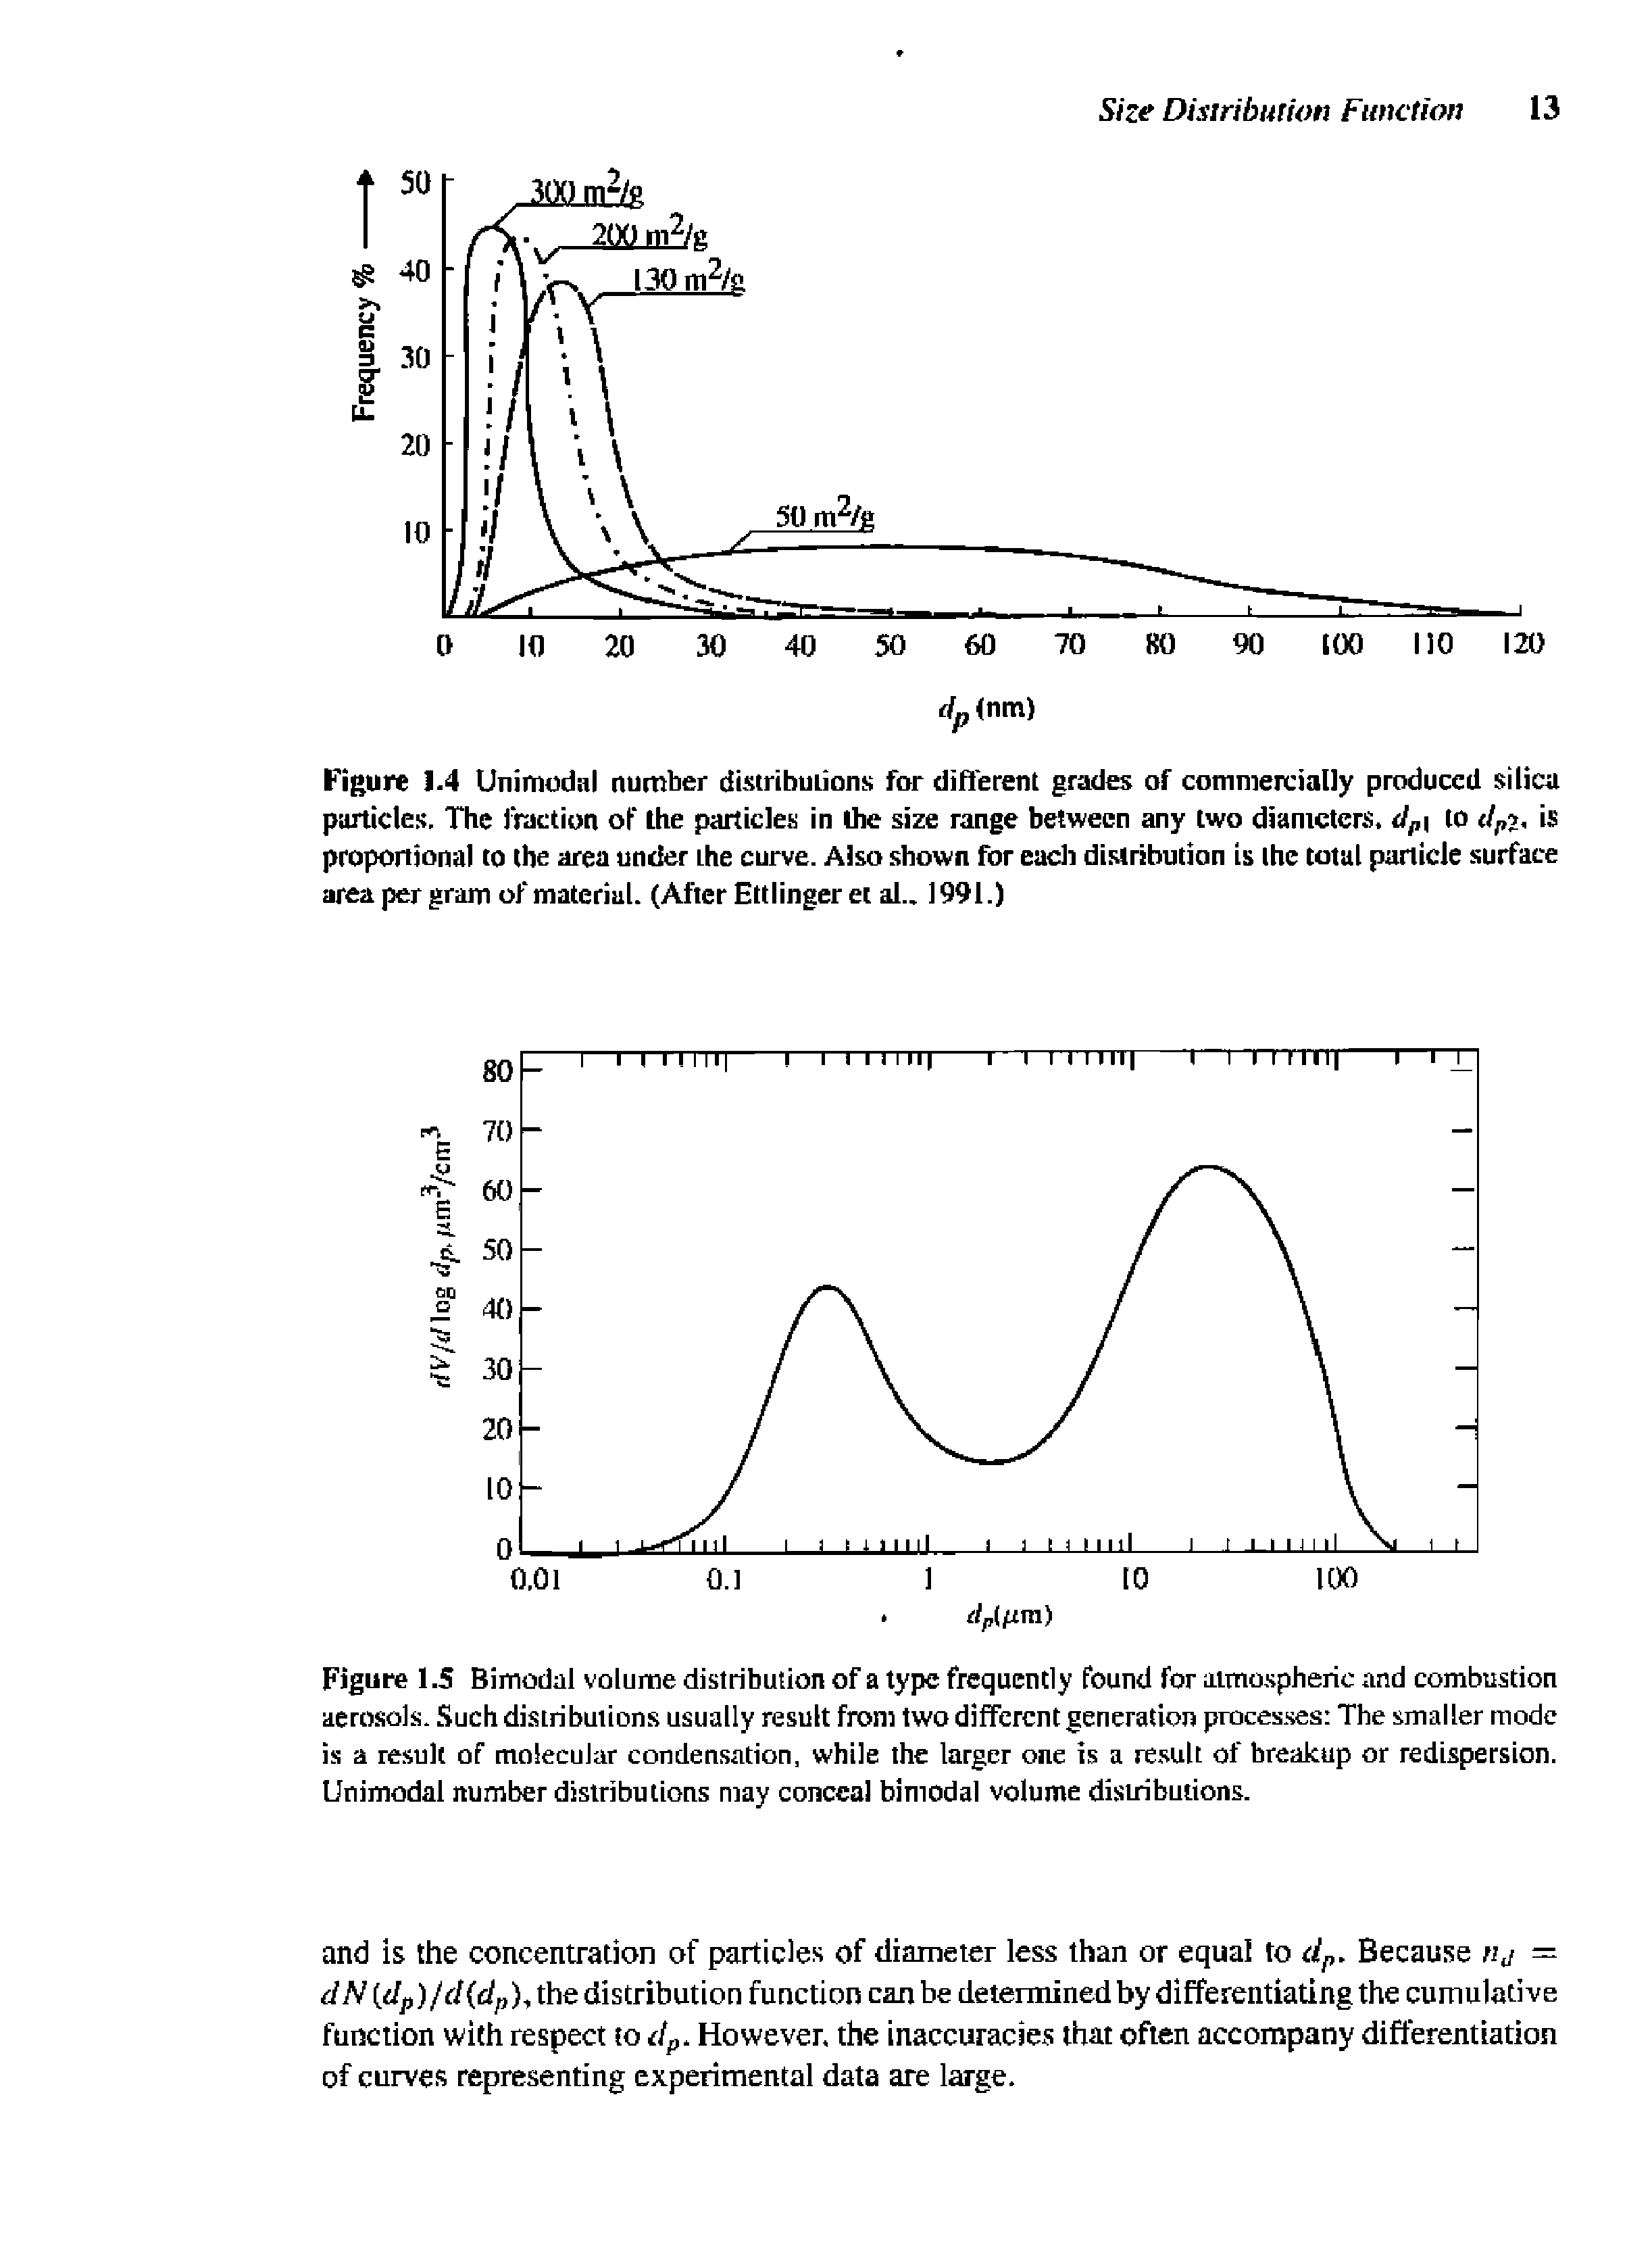 Figure 1.5 Bimodal volume distribution of a type frequently found for atmospheric and combustion aerosols. Such distributions usually result from two different generation processes The smaller mode is a result of molecular condensation, while the larger one is a result of breakup or redispersion. Unimodal number distributions may conceal bimodal volume distributions.